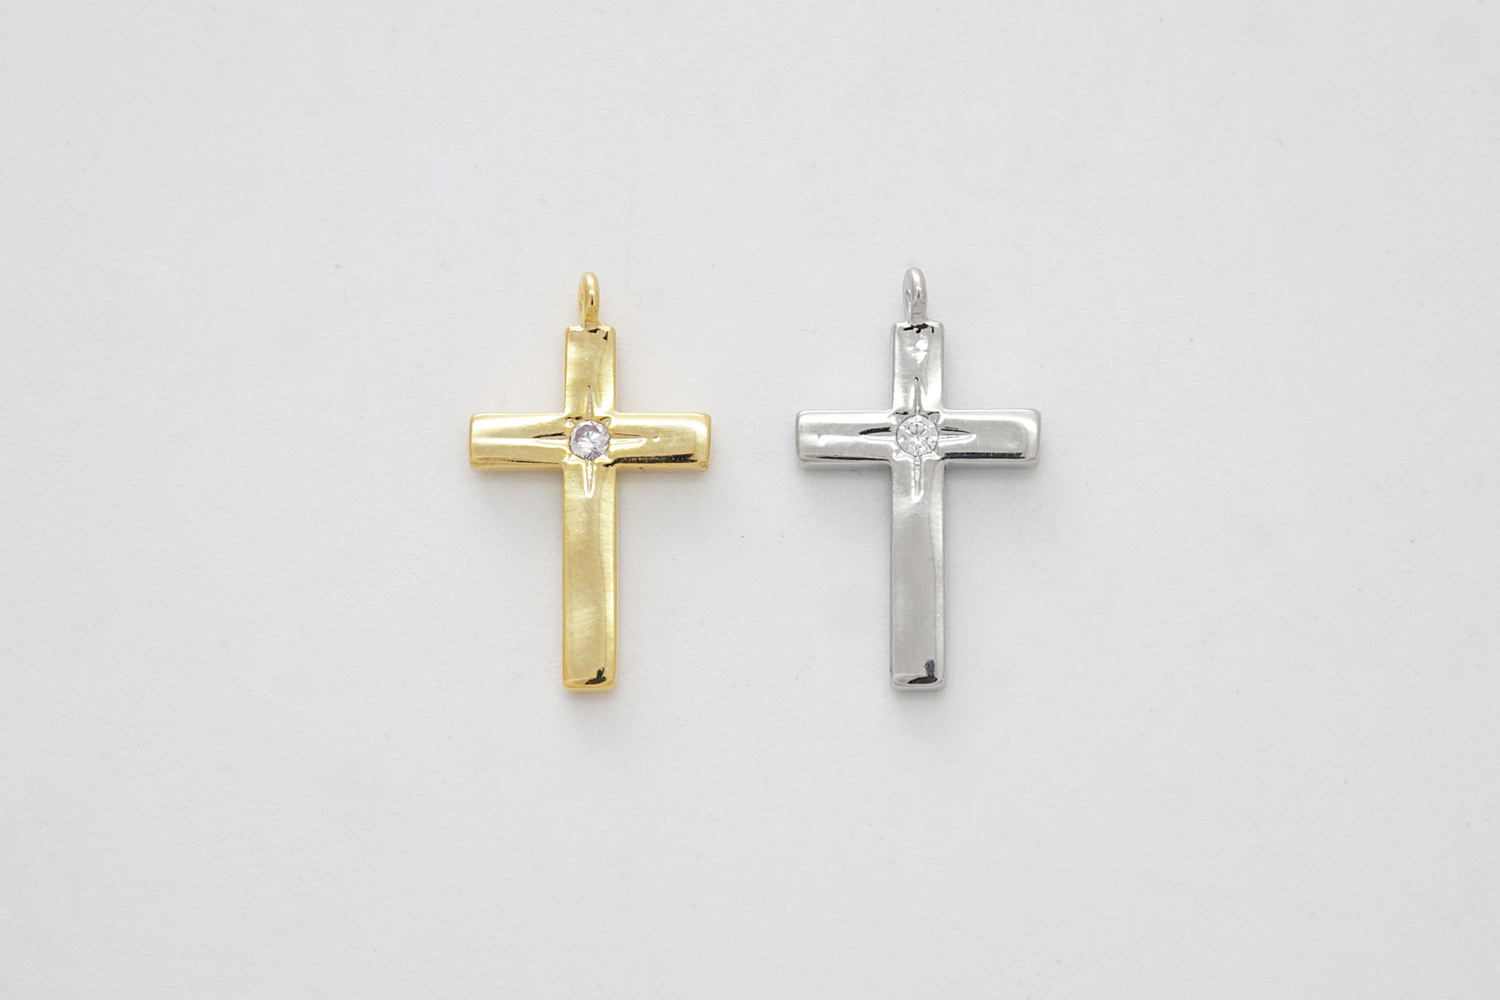 [M8-VC4] Cubic cross charm, Brass, Cubic zirconia, Nickel free, Unique charm, Jewelry making supplies, Wholesale jewelry, 1 piece (M8-G5, M8-G5R)